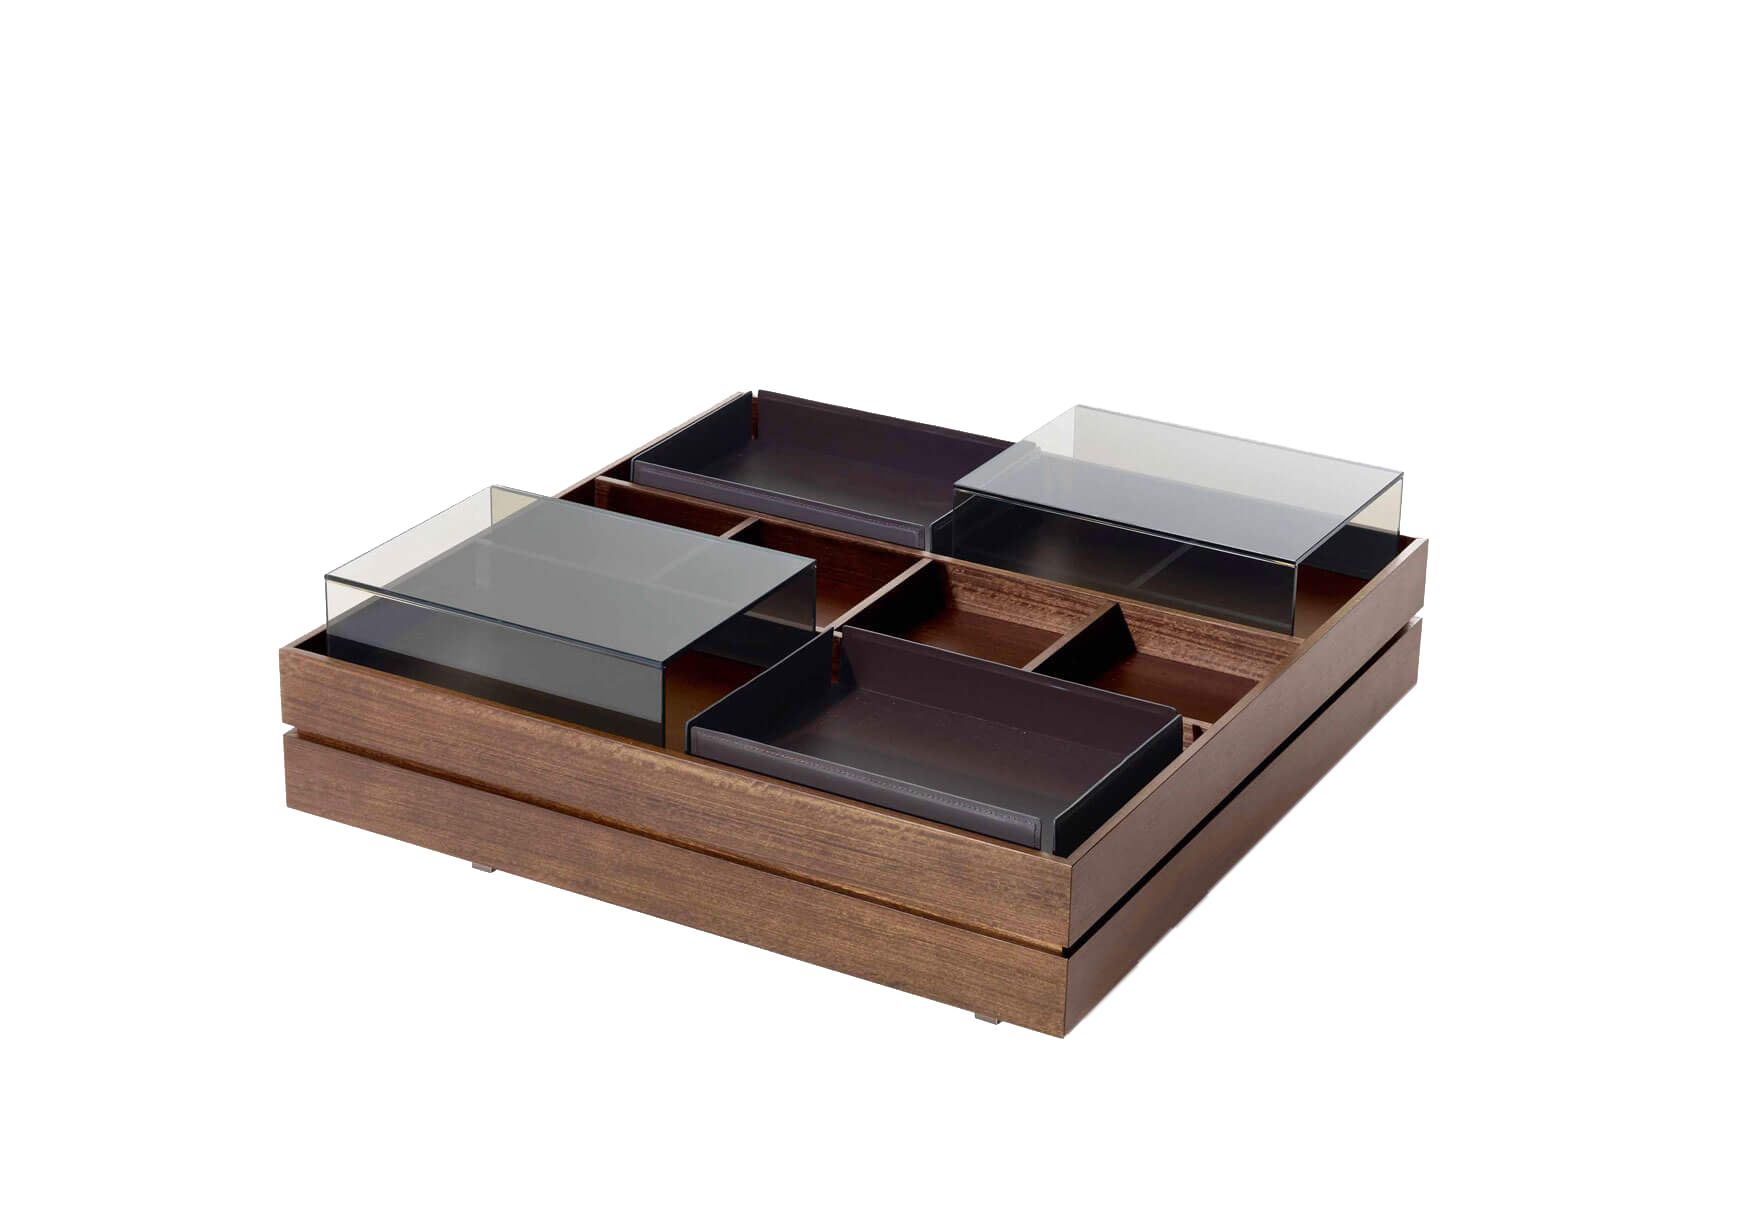 Coffee table St. Germain by Ditre Italia